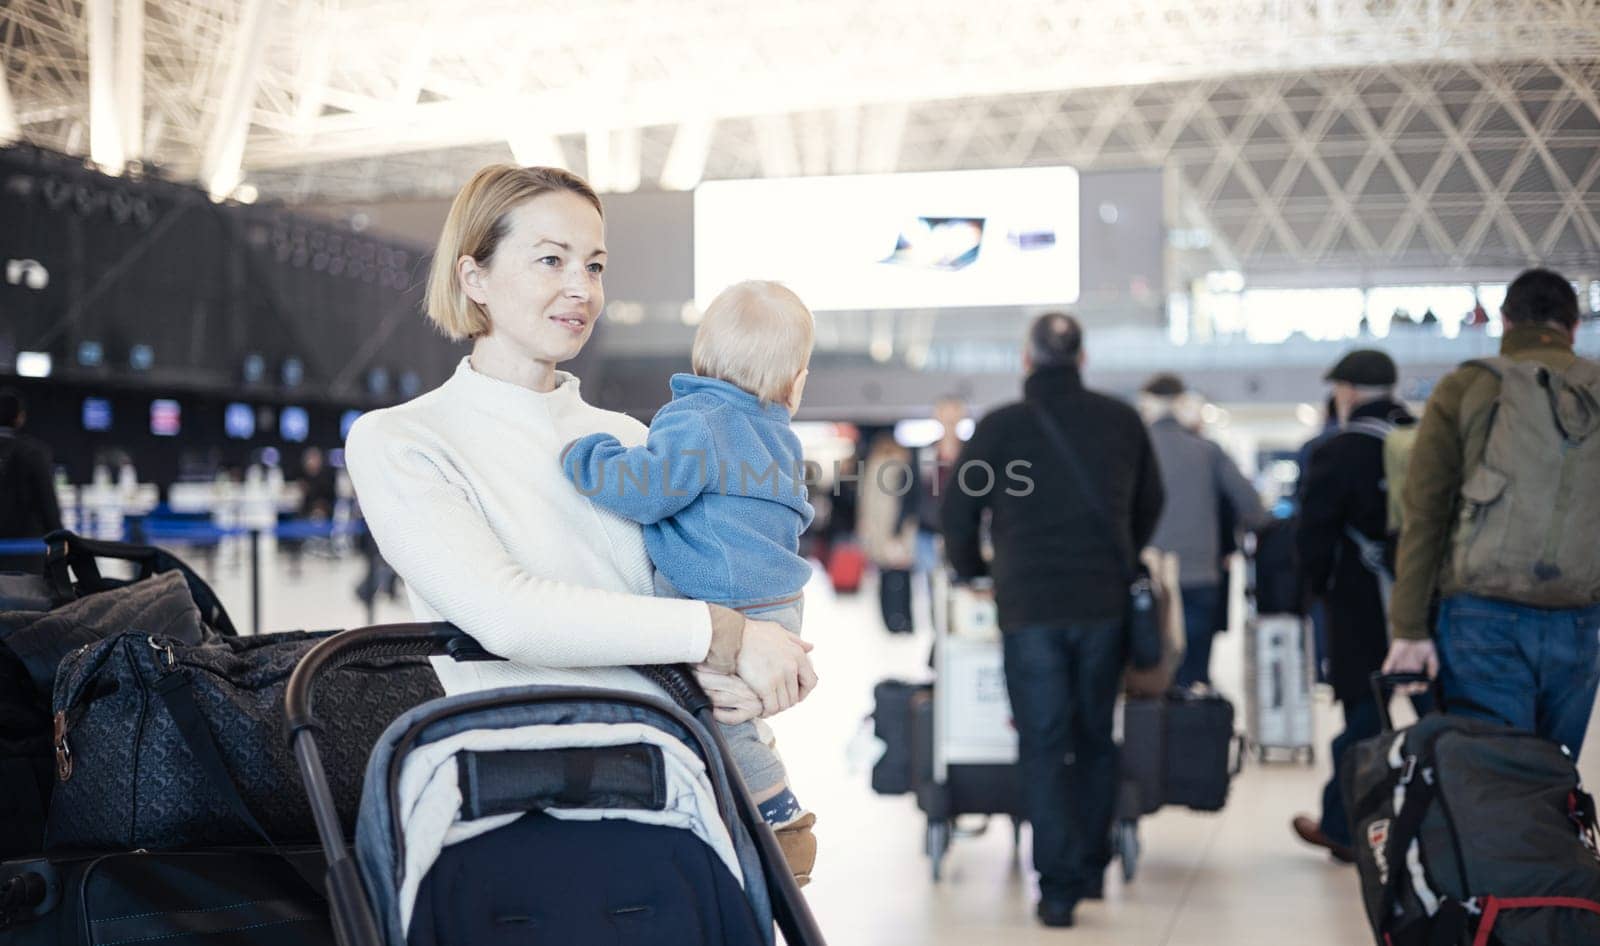 Motherat travelling with his infant baby boy child, walking, pushing baby stroller and luggage cart at airport terminal station. Travel with child concept. by kasto